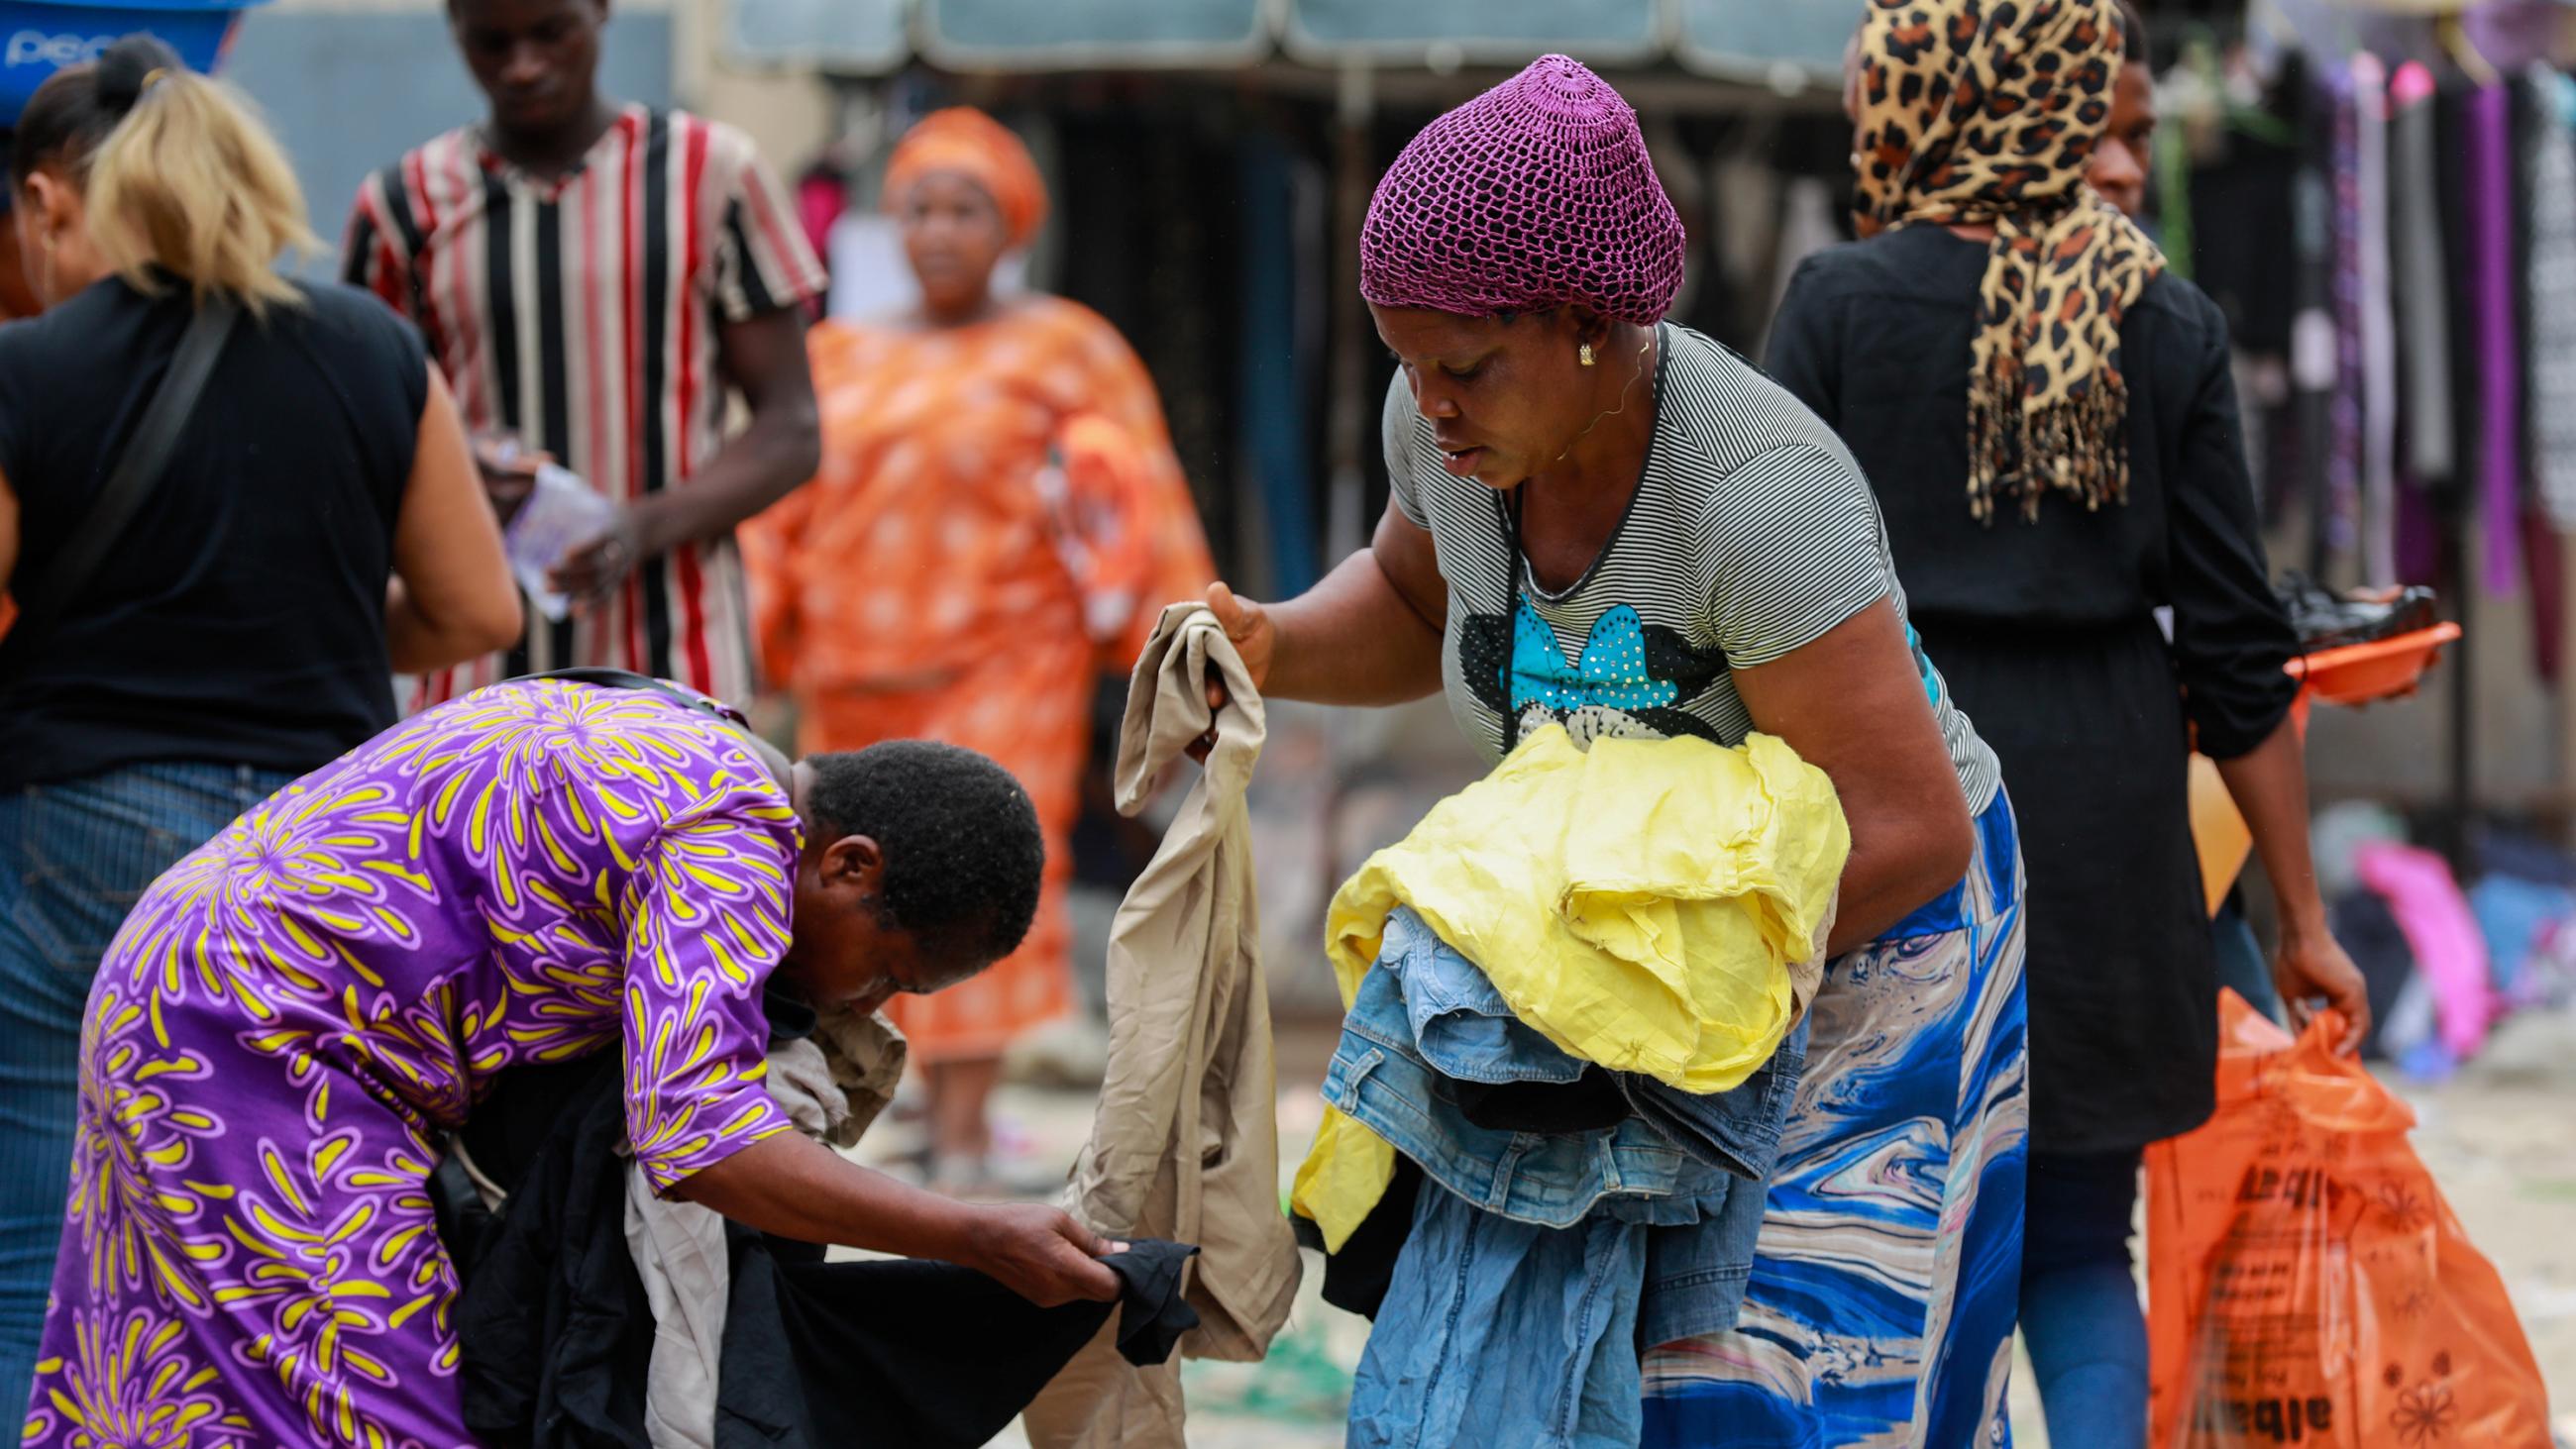 Picture shows a number of women with shopping bags and armfuls of clothes in an open market. 